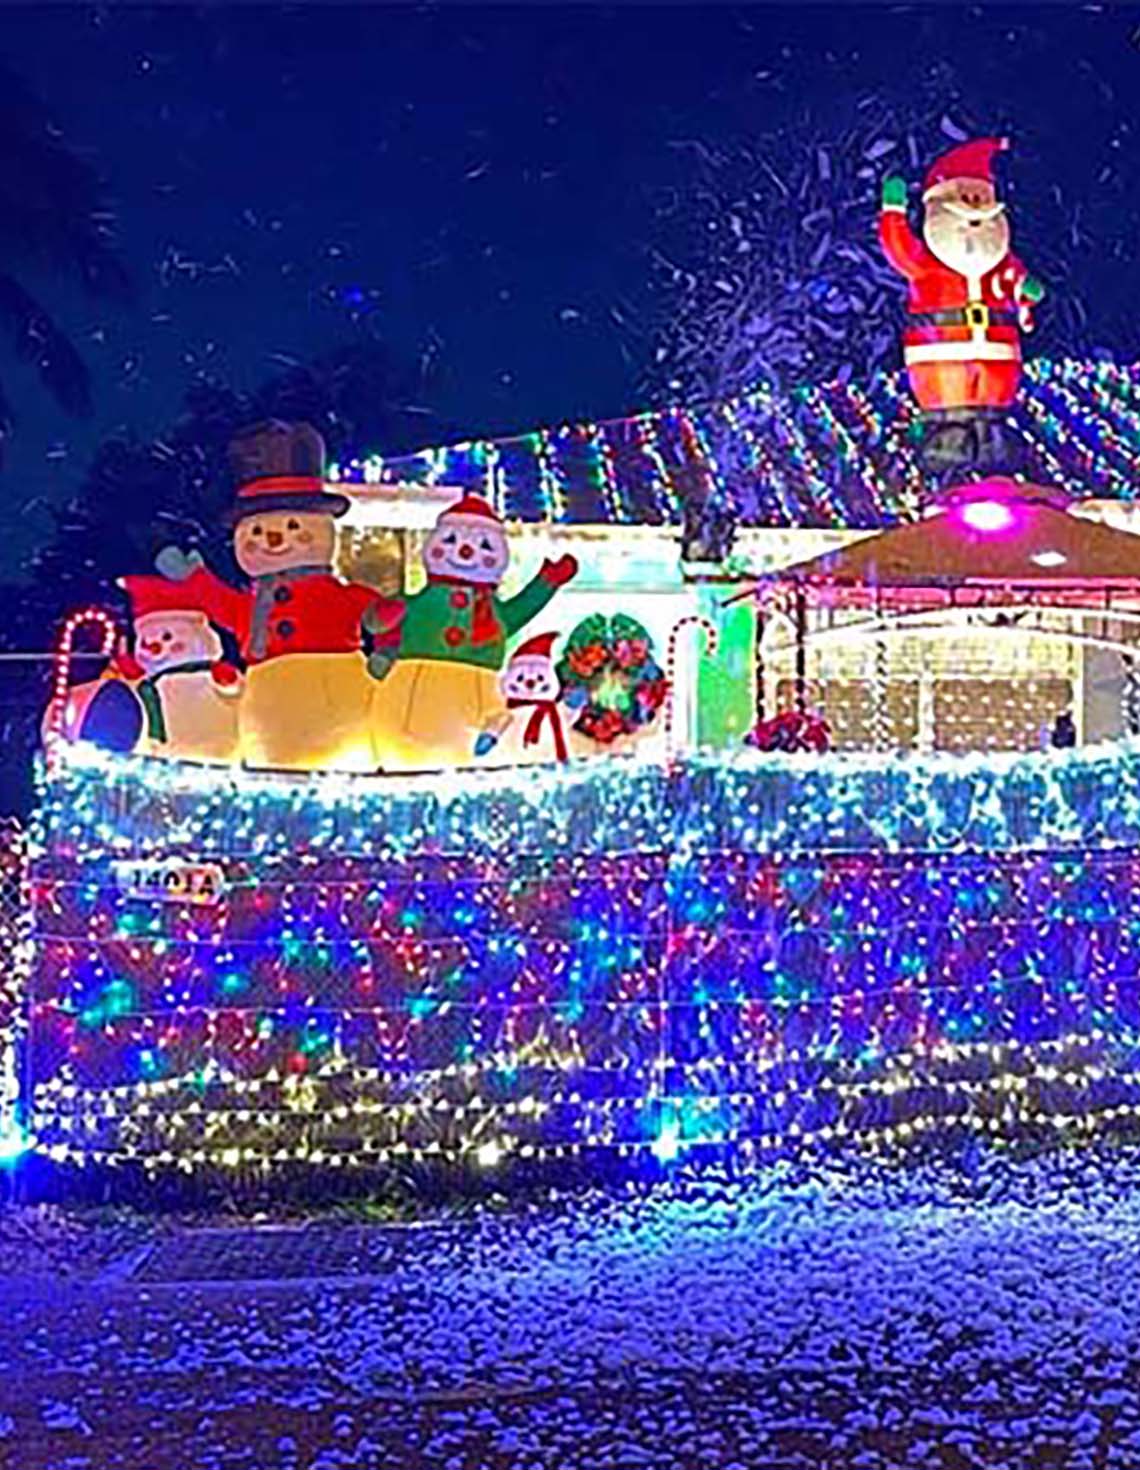 key west home with holiday lights